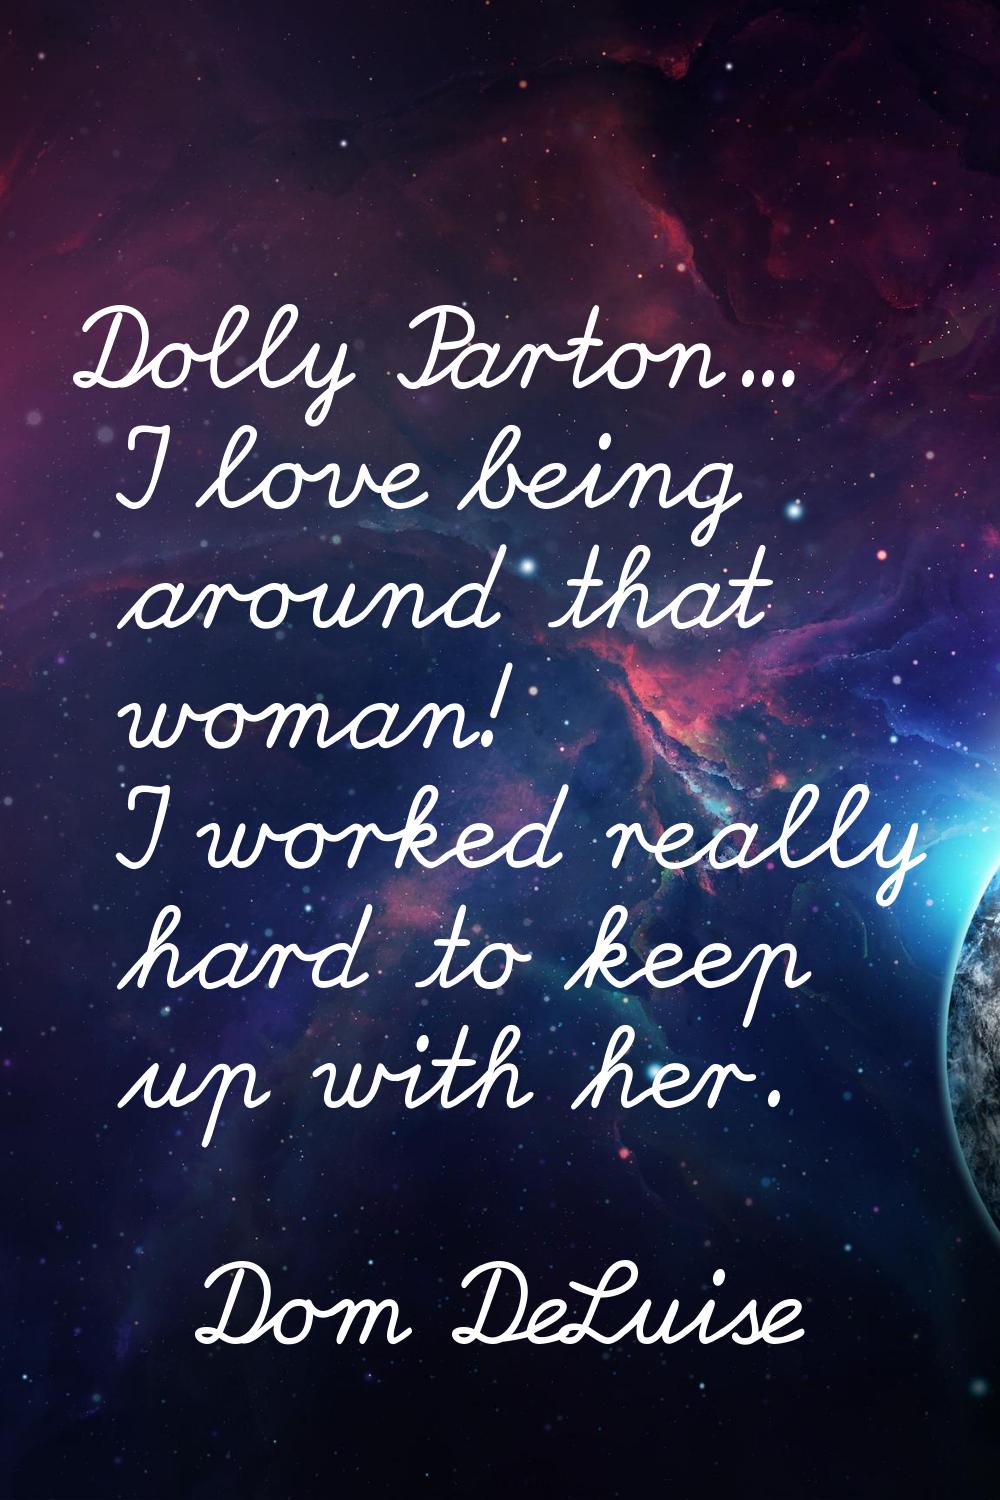 Dolly Parton... I love being around that woman! I worked really hard to keep up with her.